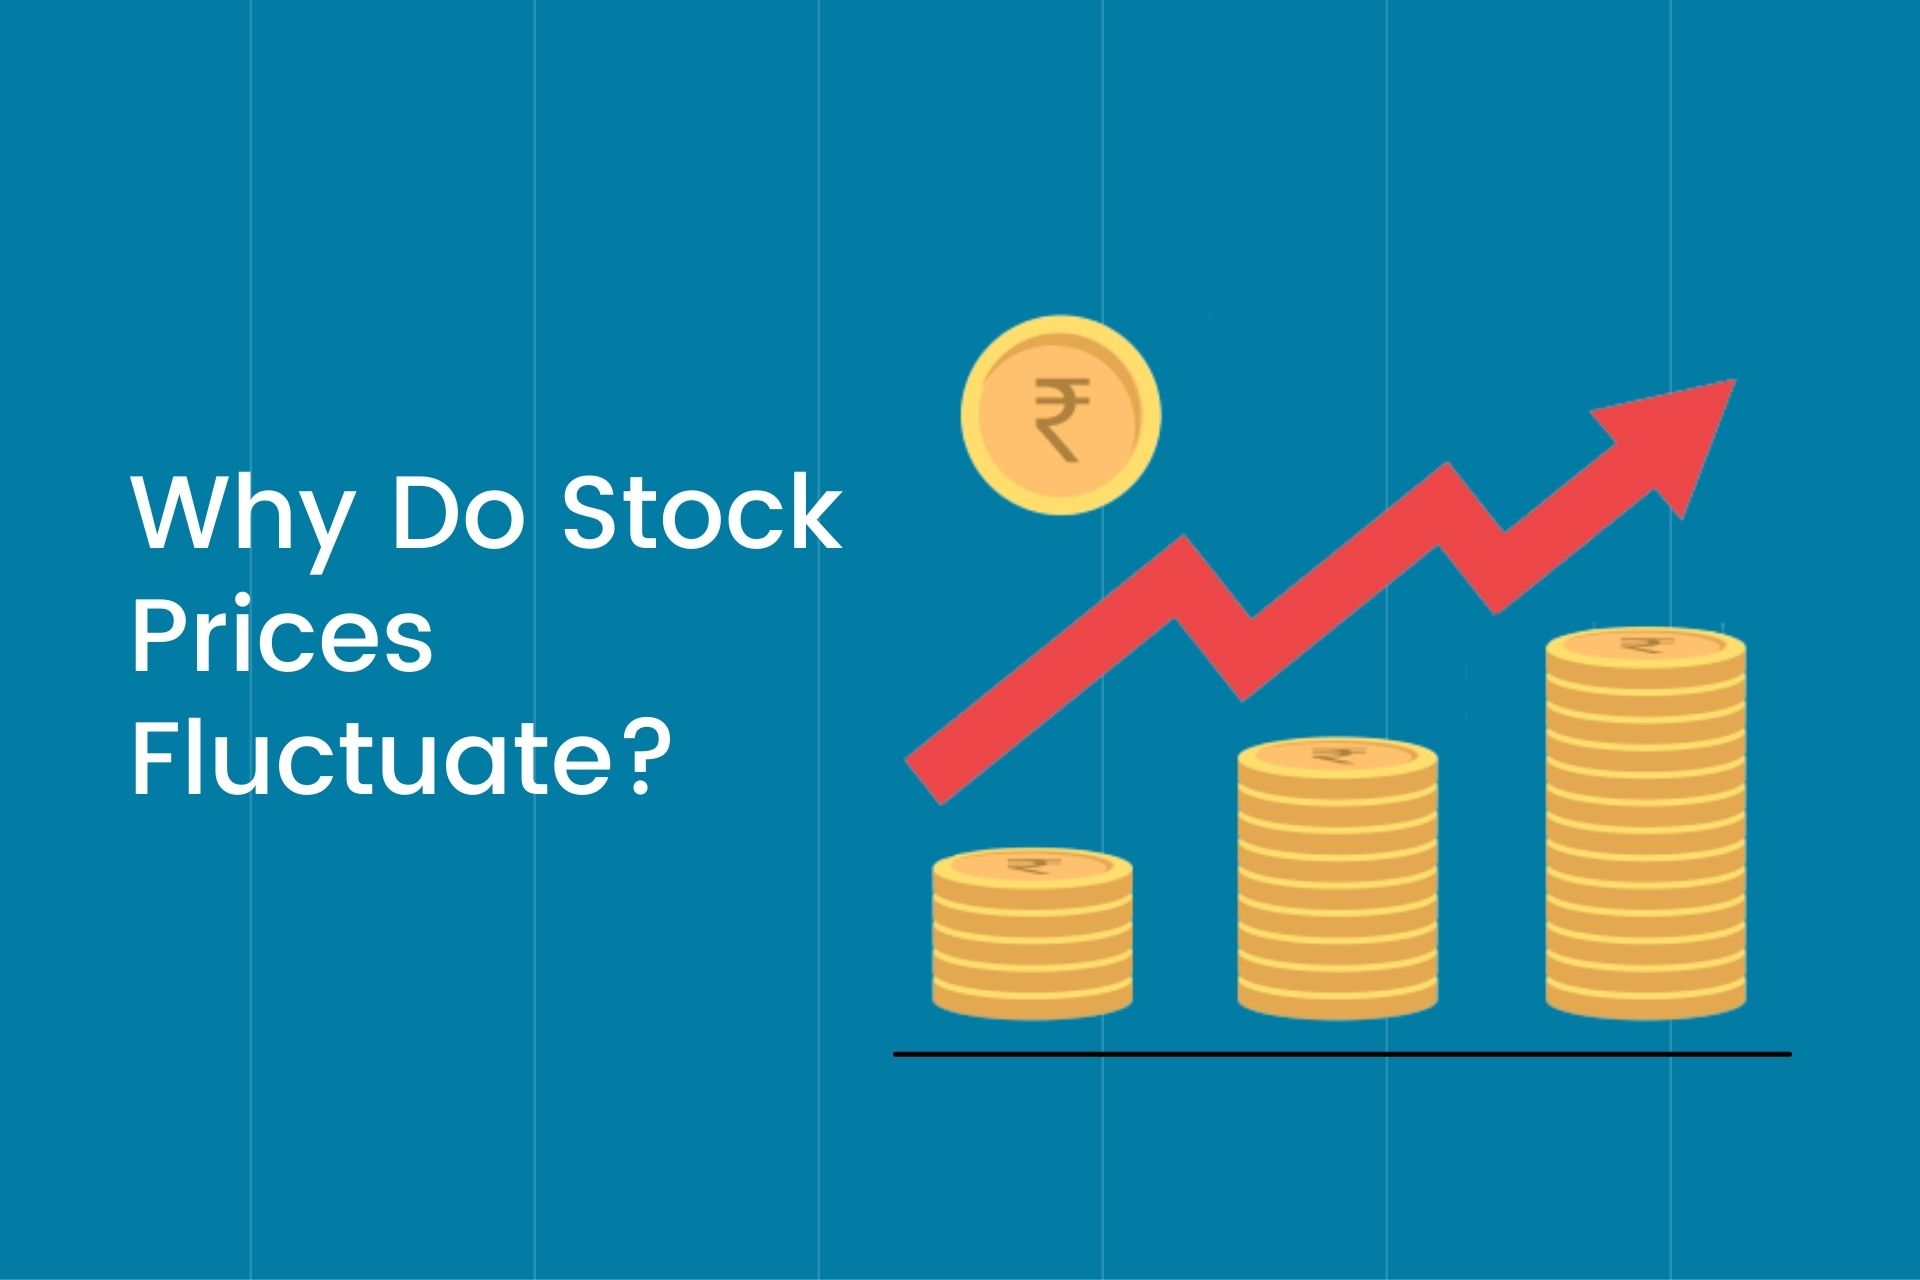 What Causes Stock Prices to Change